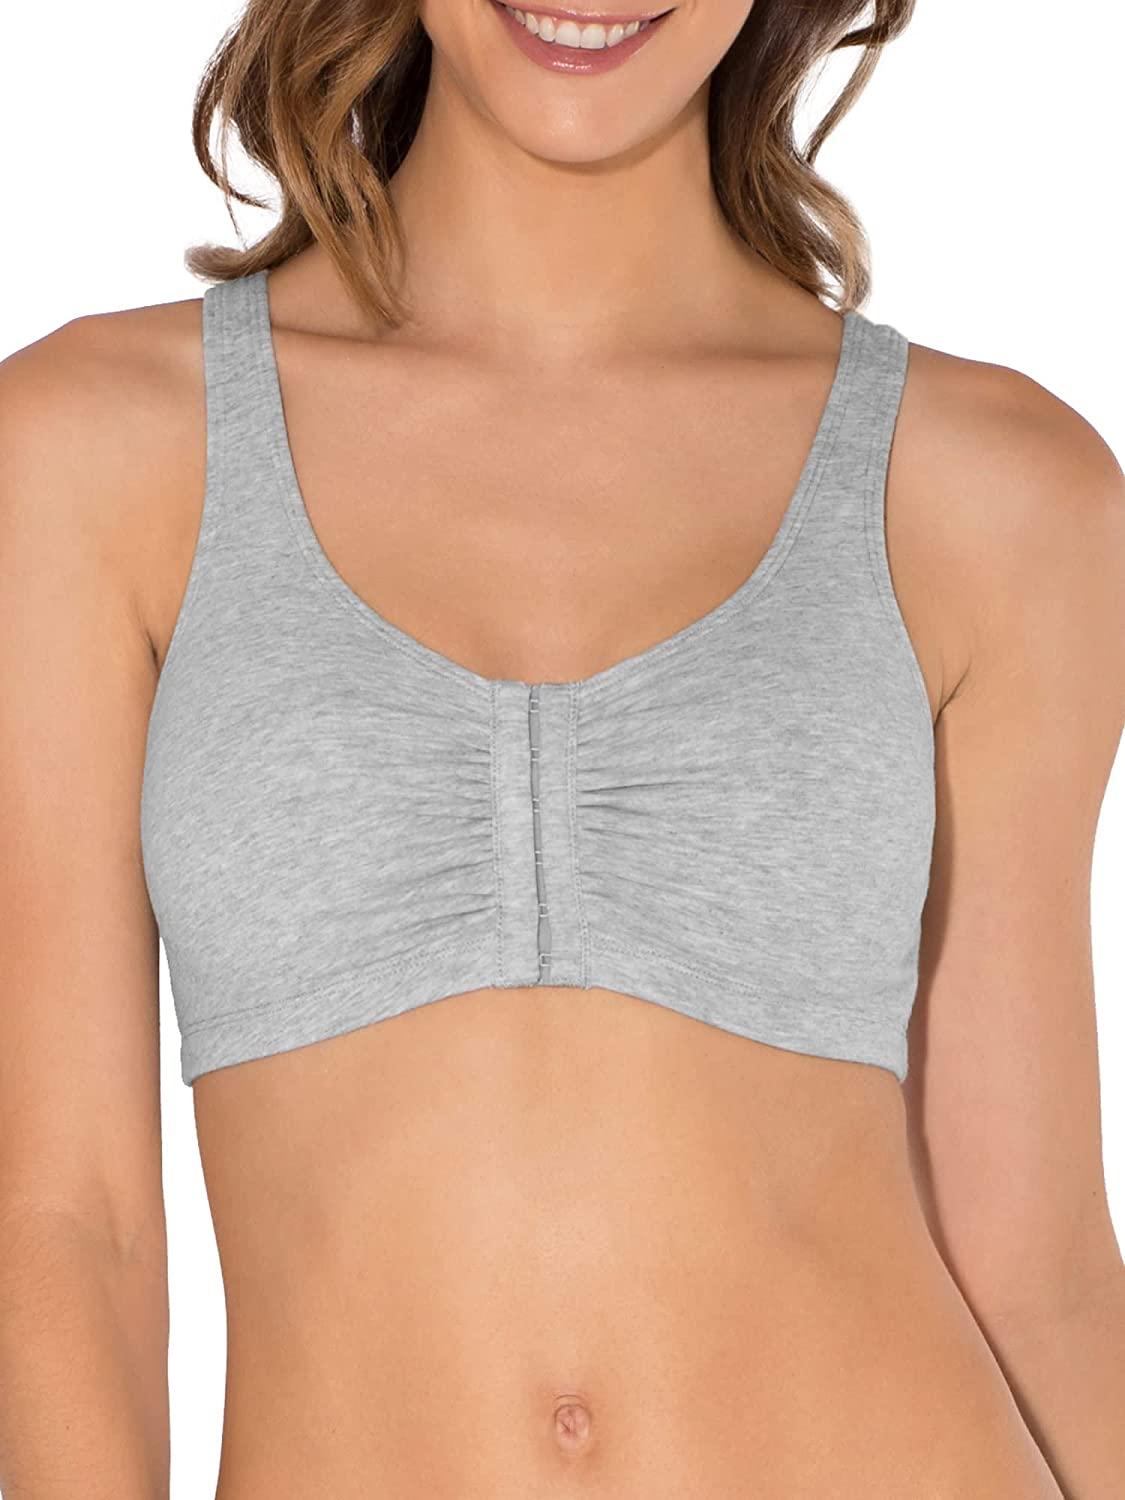 Best Fruit Of The Loom Cotton Bra With Light Padding And Underwire